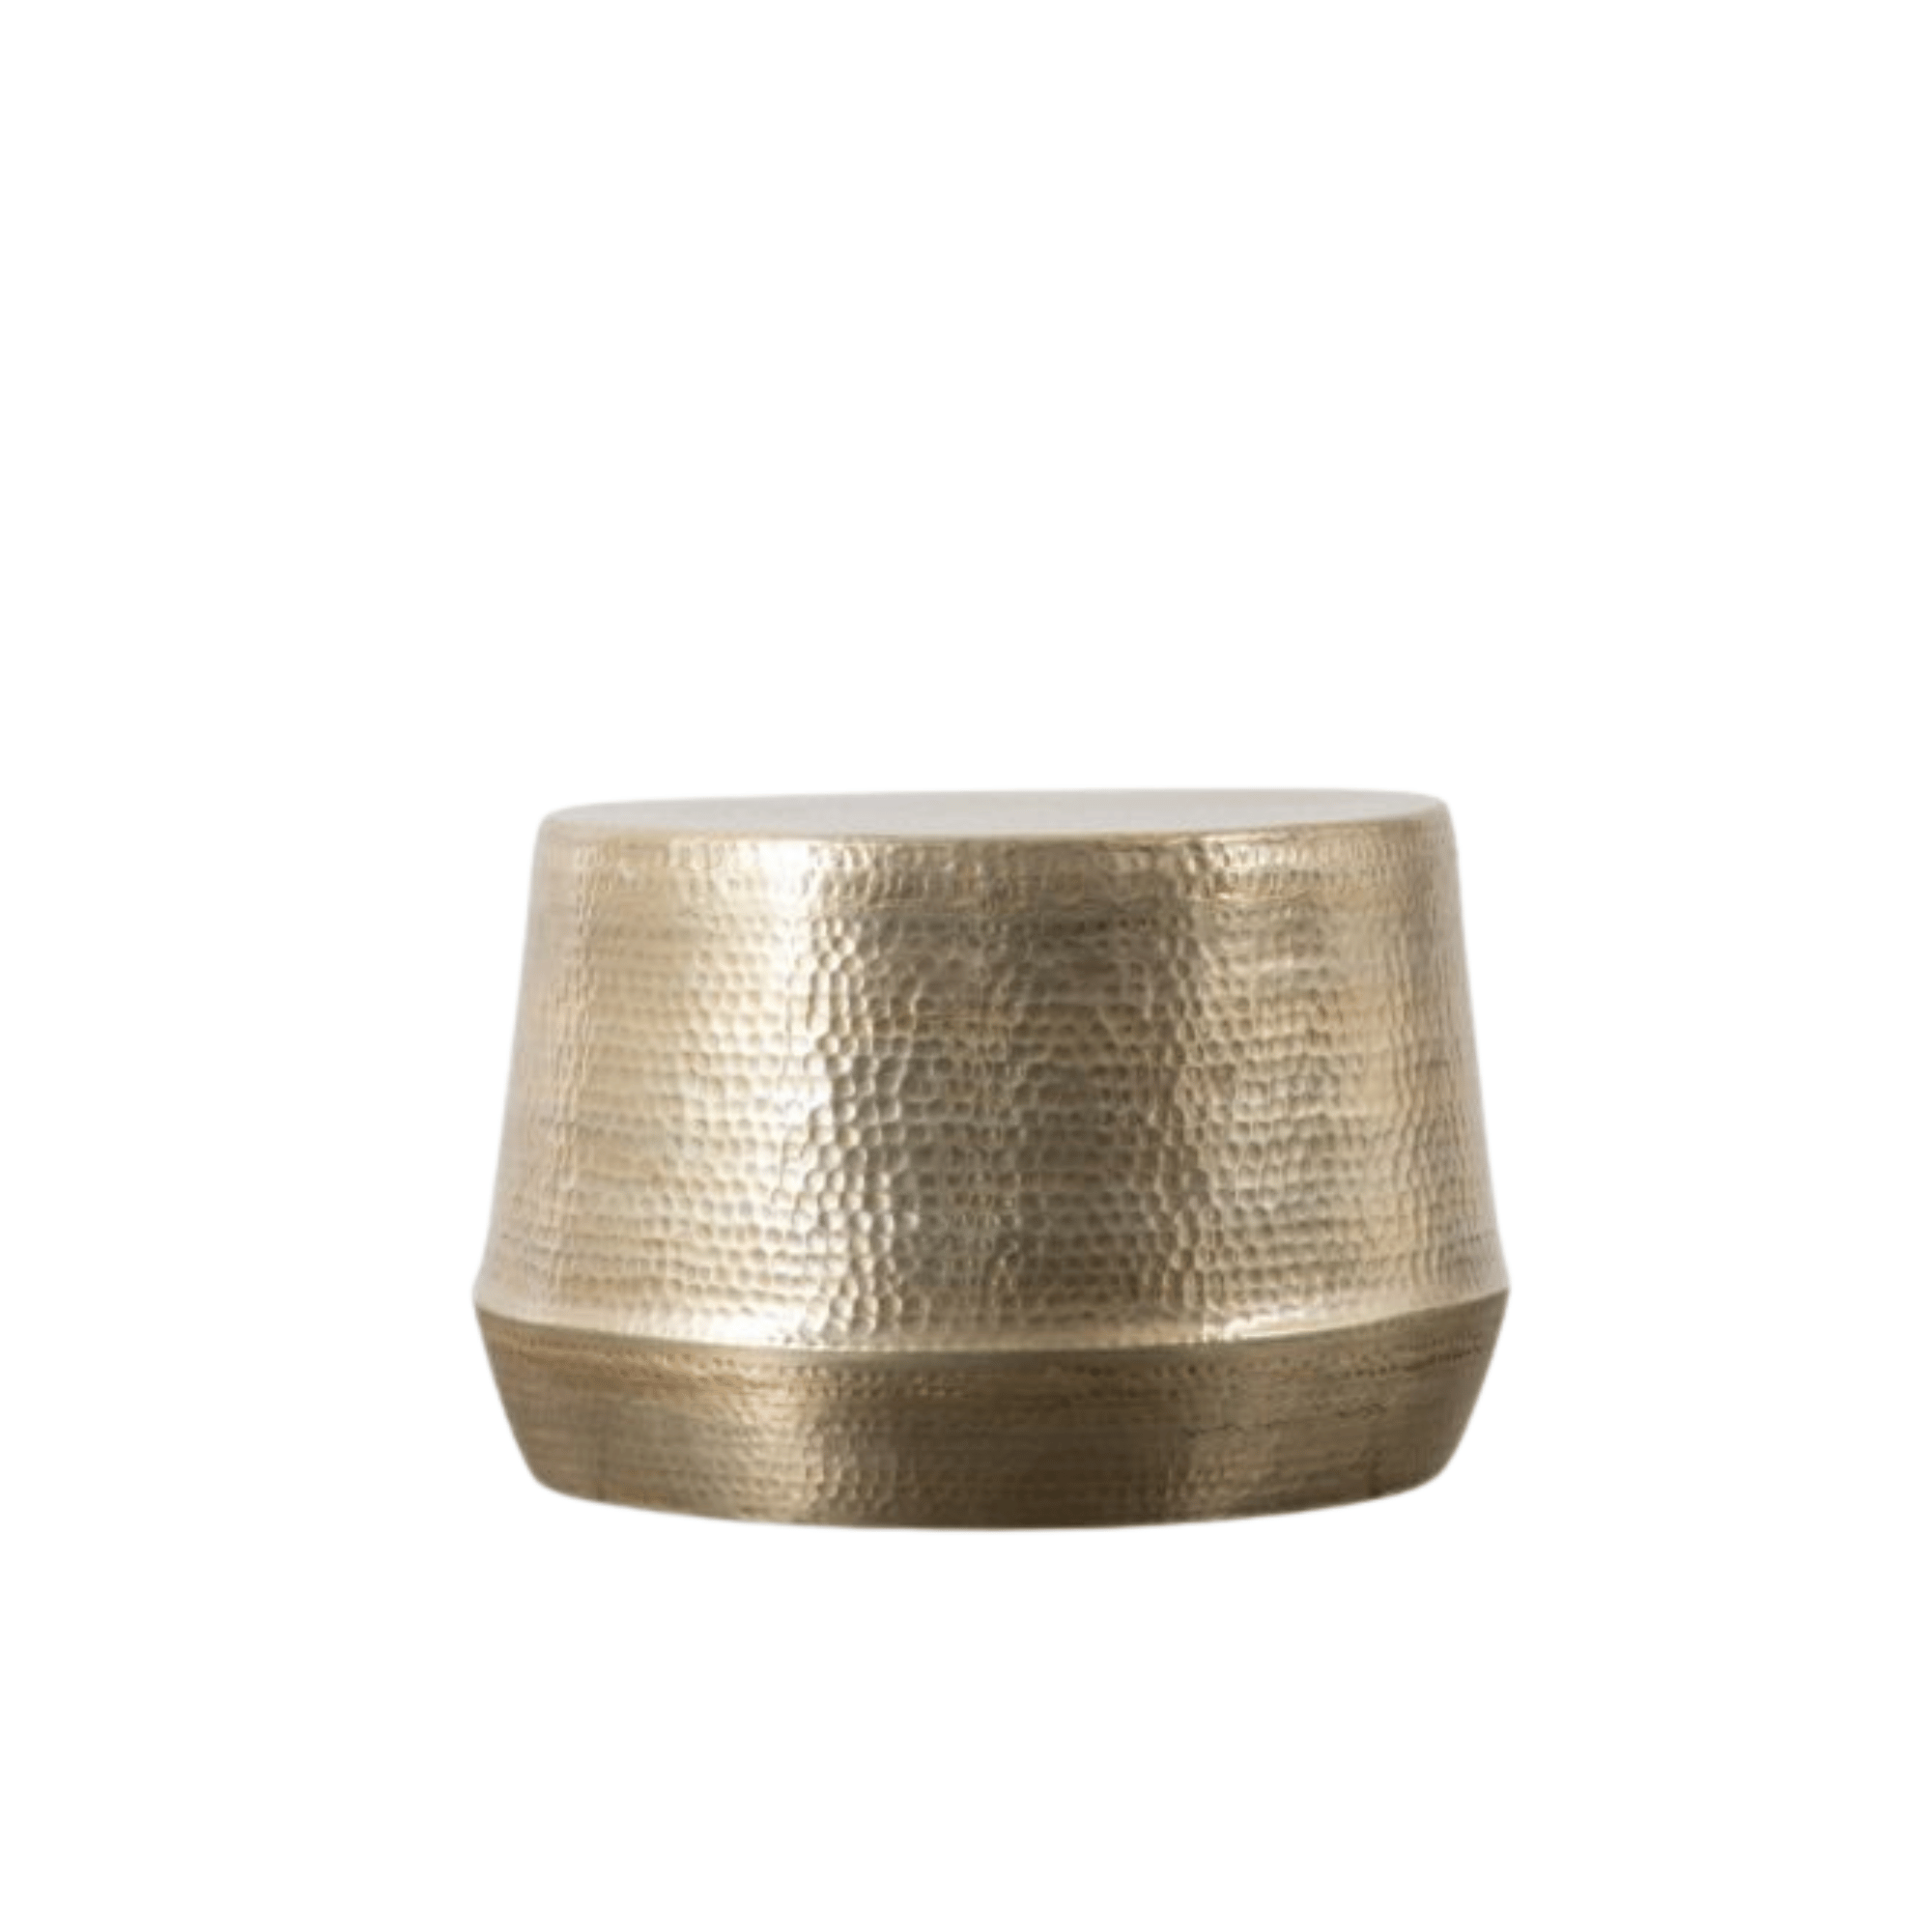 Deodar hammered metal occasional or coffee table in light gold finish | MalletandPlane.com